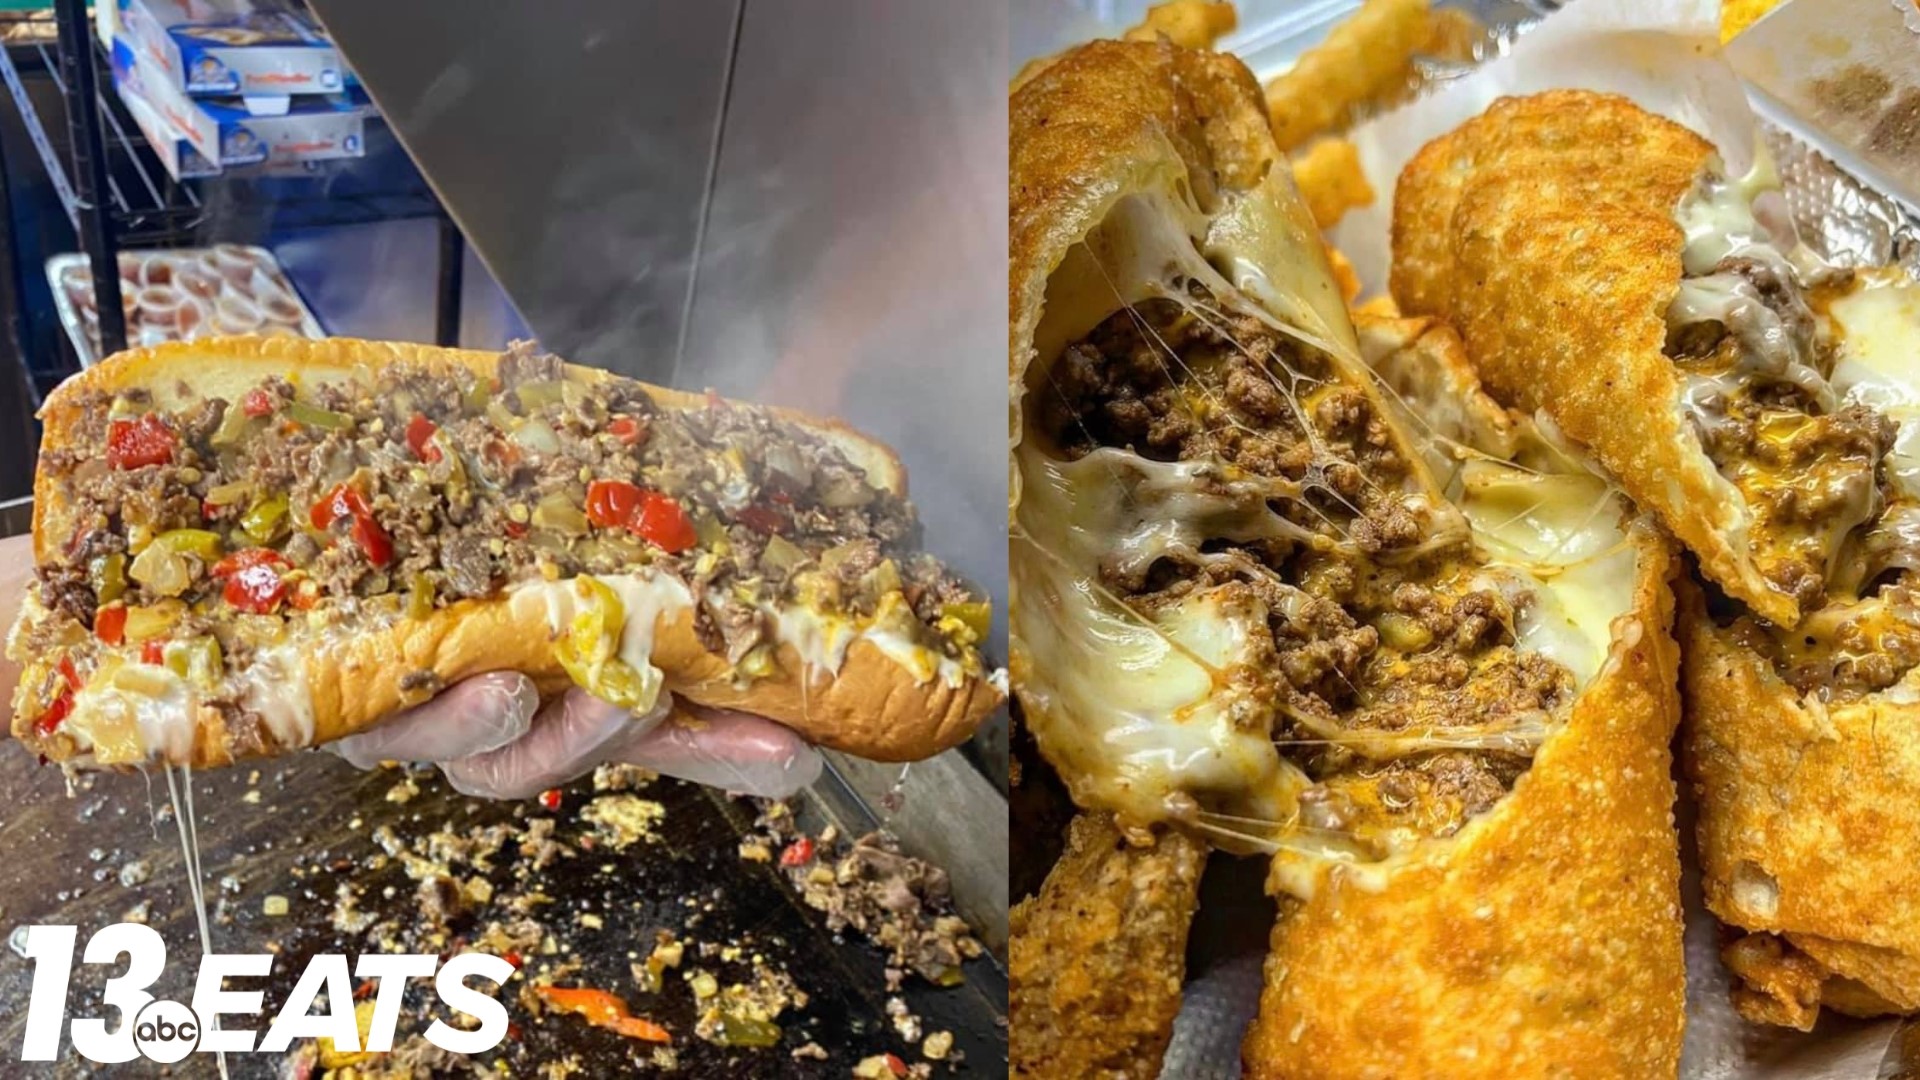 You can find the owner of this 'dream restaurant' behind the grill seven days a week, 12 hours a day, ladling Cheez Whiz onto ultra-loaded cheesesteaks.